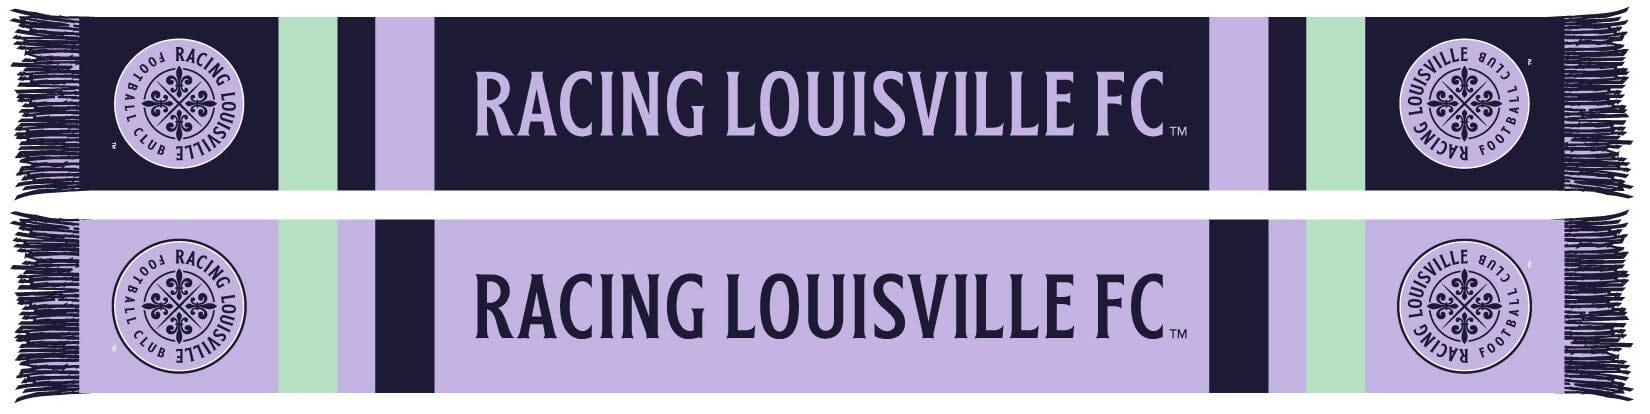 RACING LOUISVILLE FC SCARF - Essentials (Sublimated)